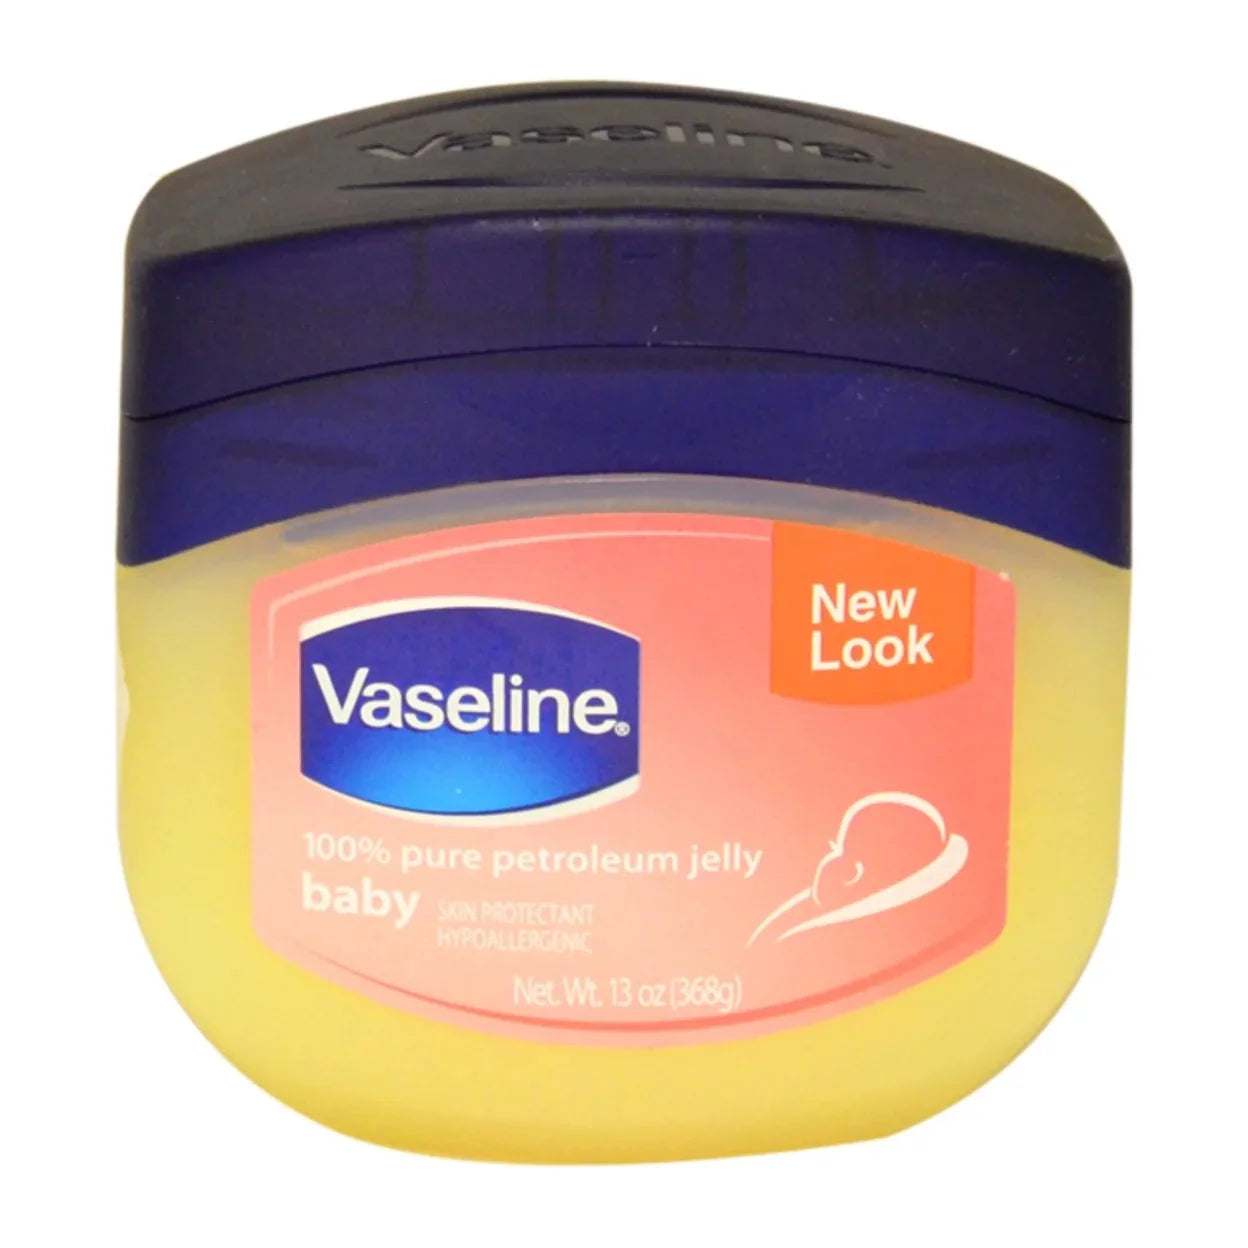 Wholesale prices with free shipping all over United States Vaseline Hypoallergenic Baby Oil Diaper Rash Cream Healing Petroleum Jelly, 13 oz - Steven Deals